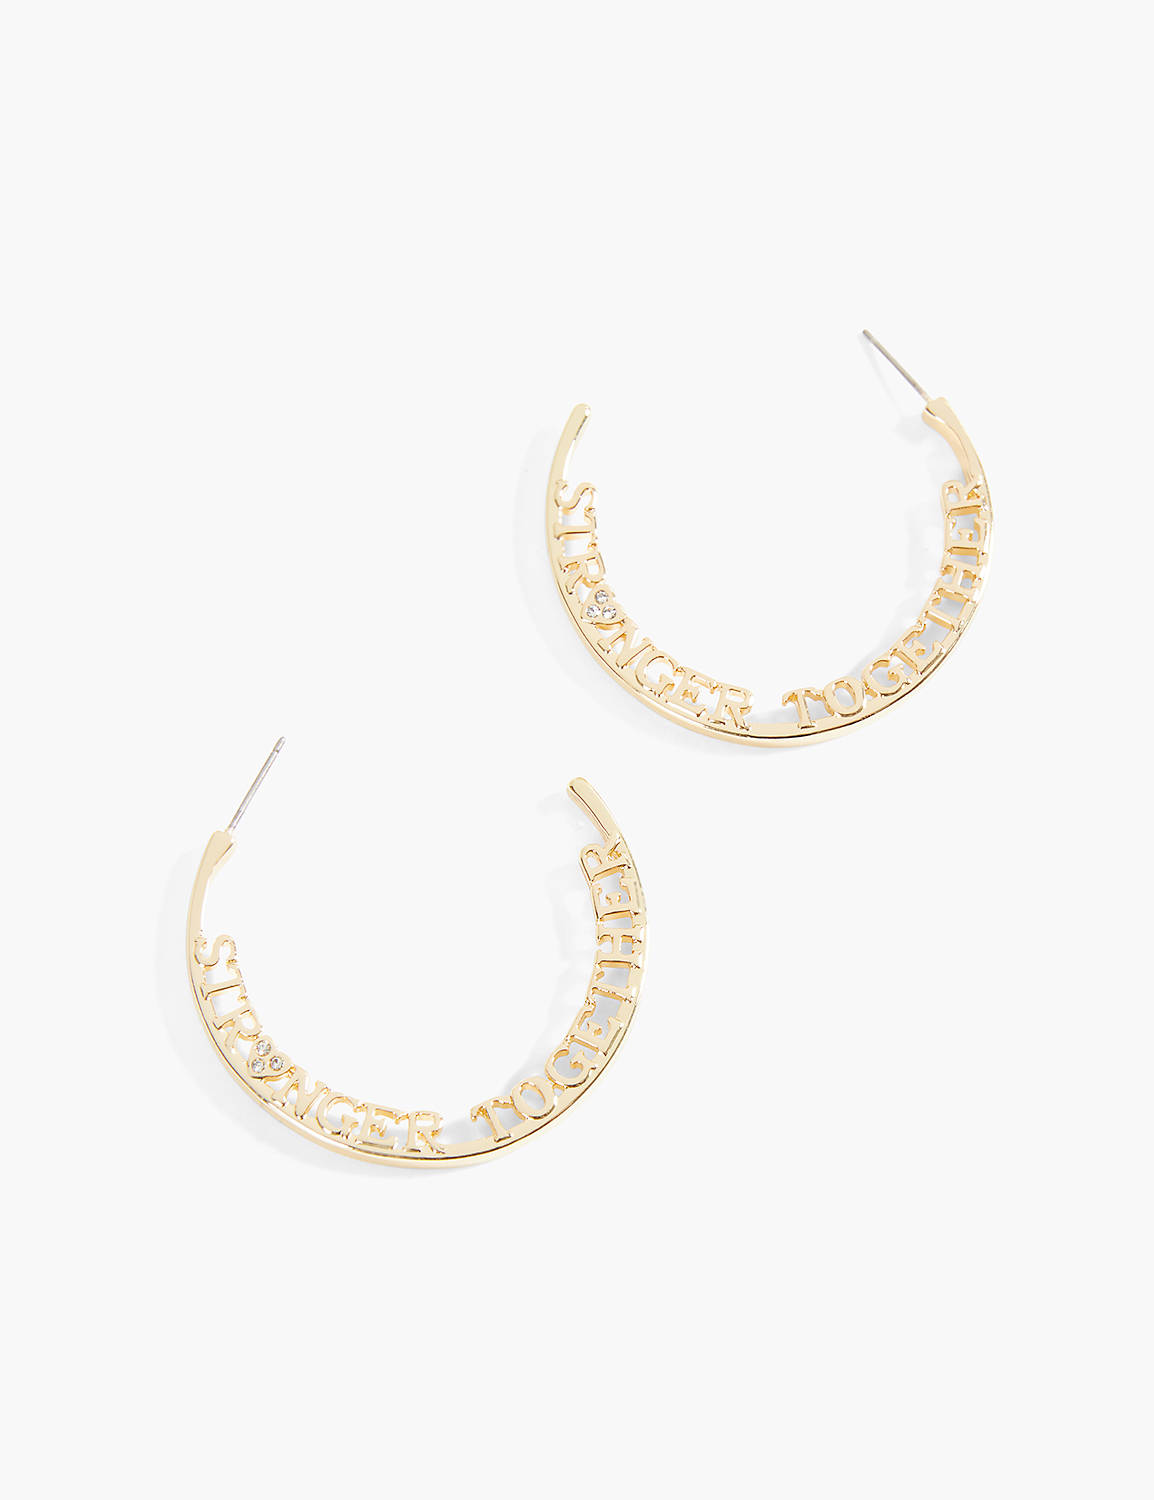 Stronger Together Hoop Earrings Product Image 1